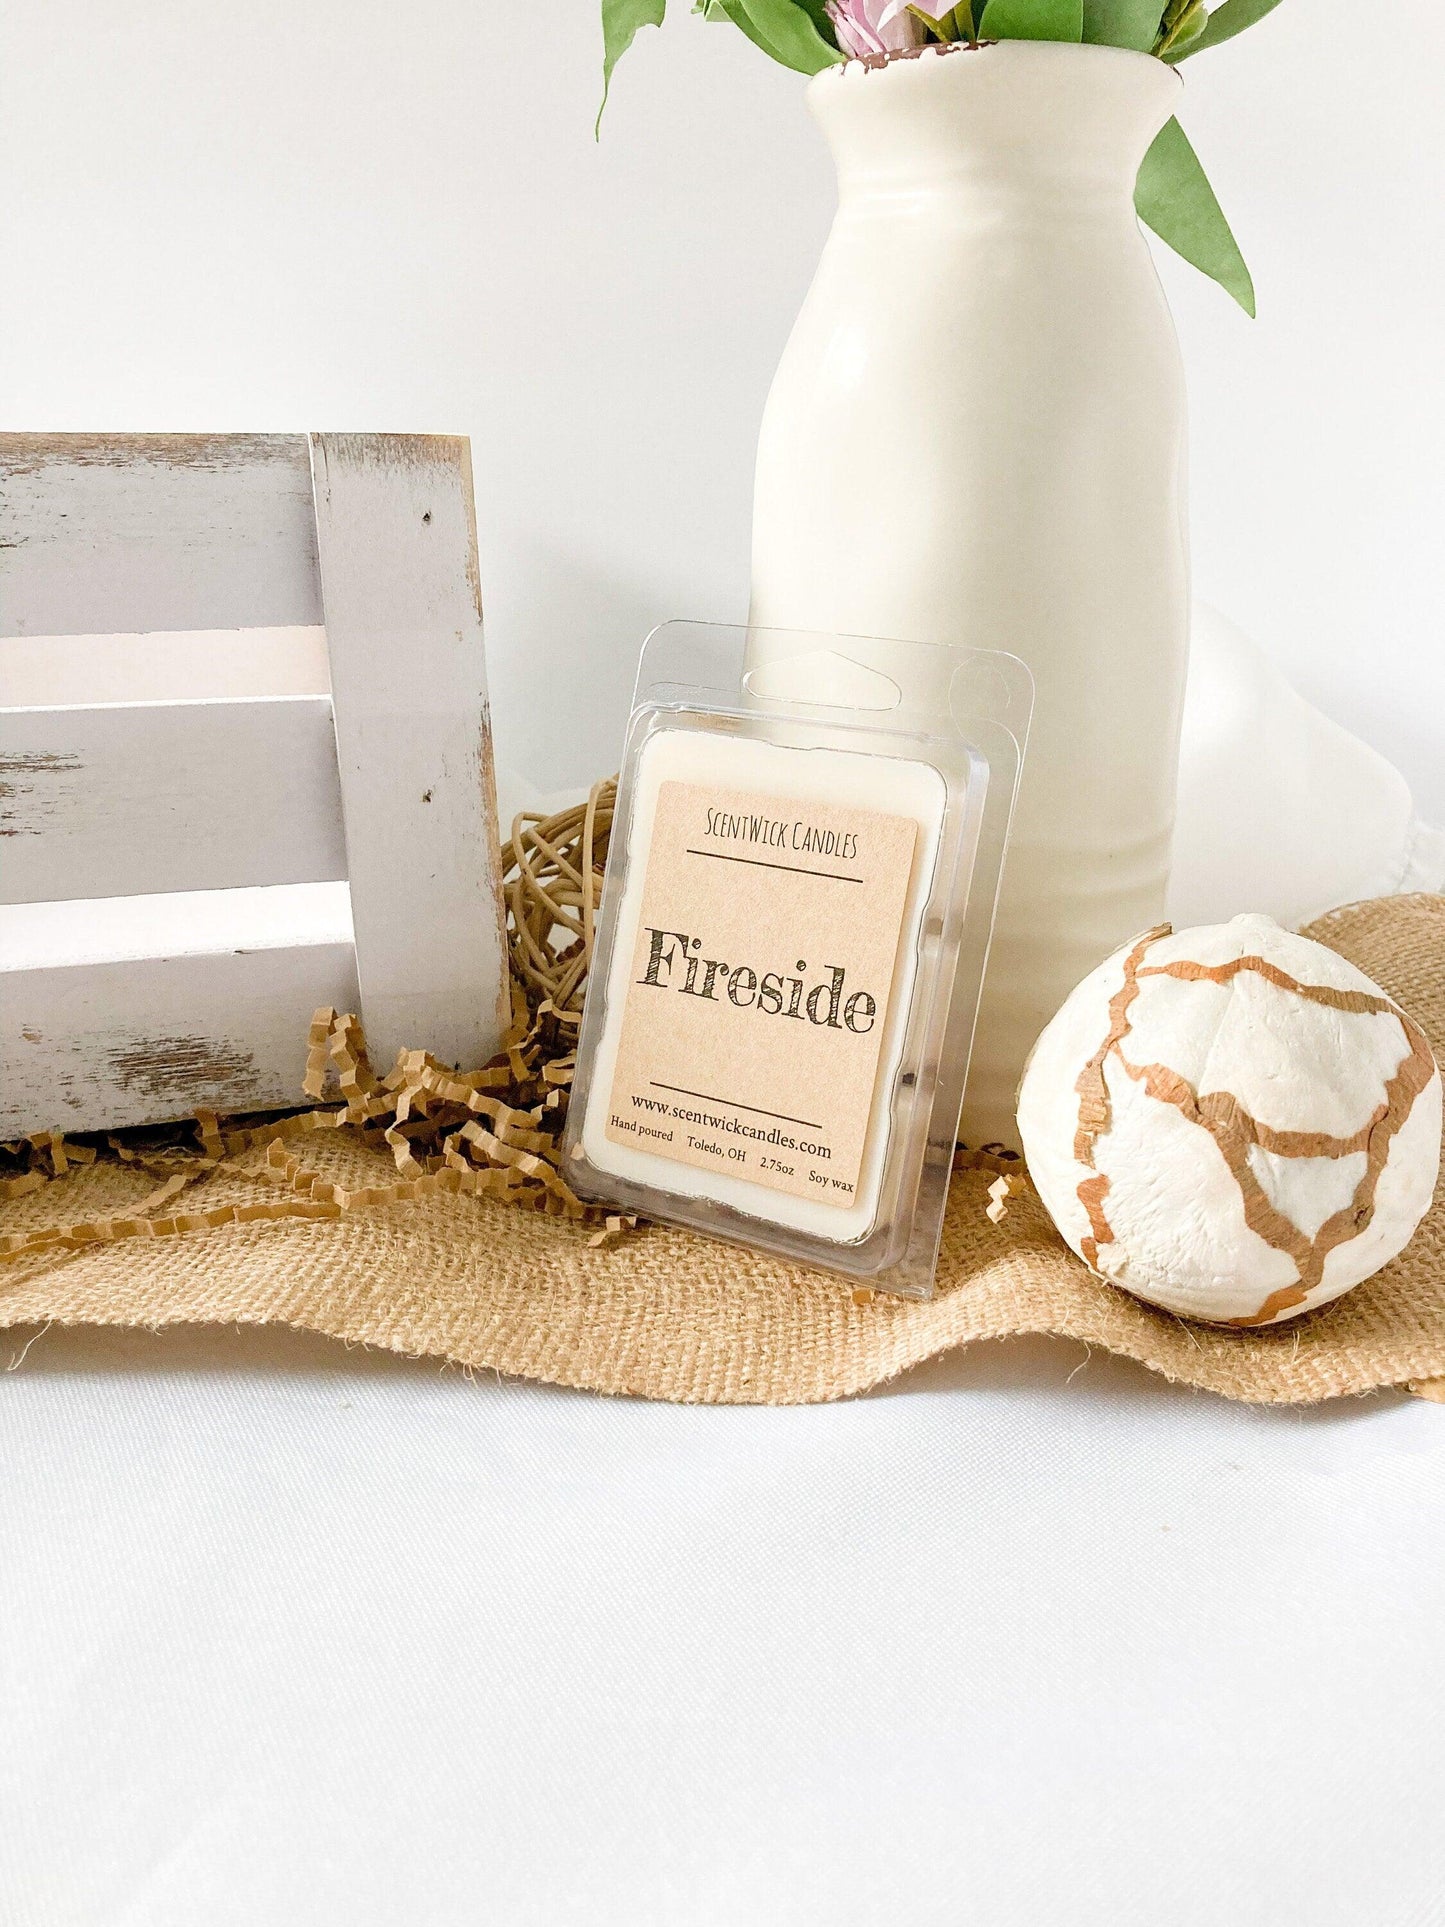 Fireside - ScentWick Candles